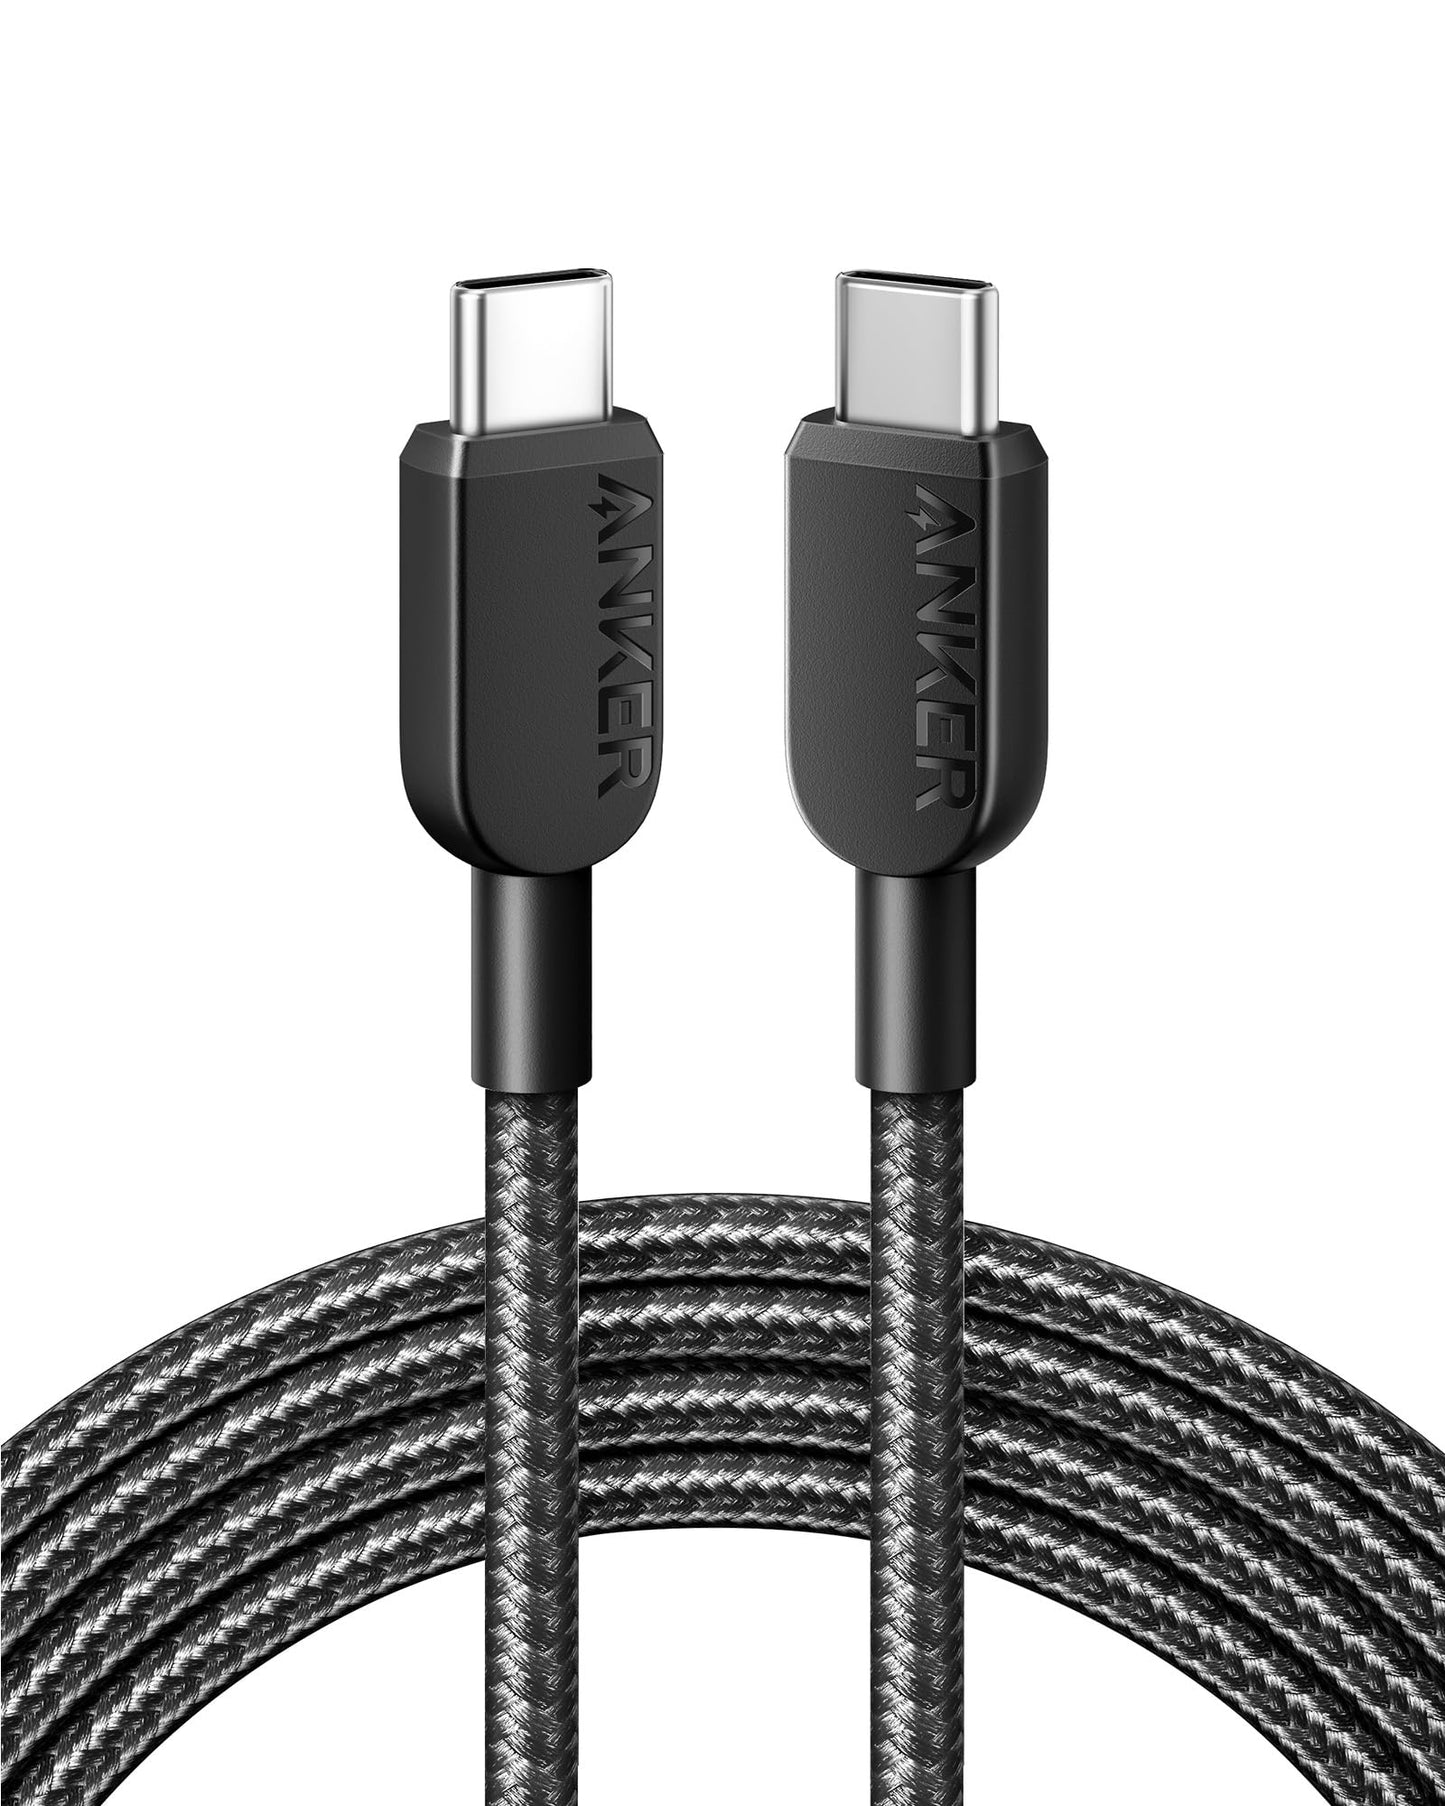 Anker USB C Cable, 310 USB C to USB C Cable (3ft), (60W/3A) USB C Charger Cable Fast Charge for Samsung Galaxy S22, iPad Pro 2021, iPad Mini 6, iPad Air 4, MacBook Pro 2020, Switch (USB 2.0)